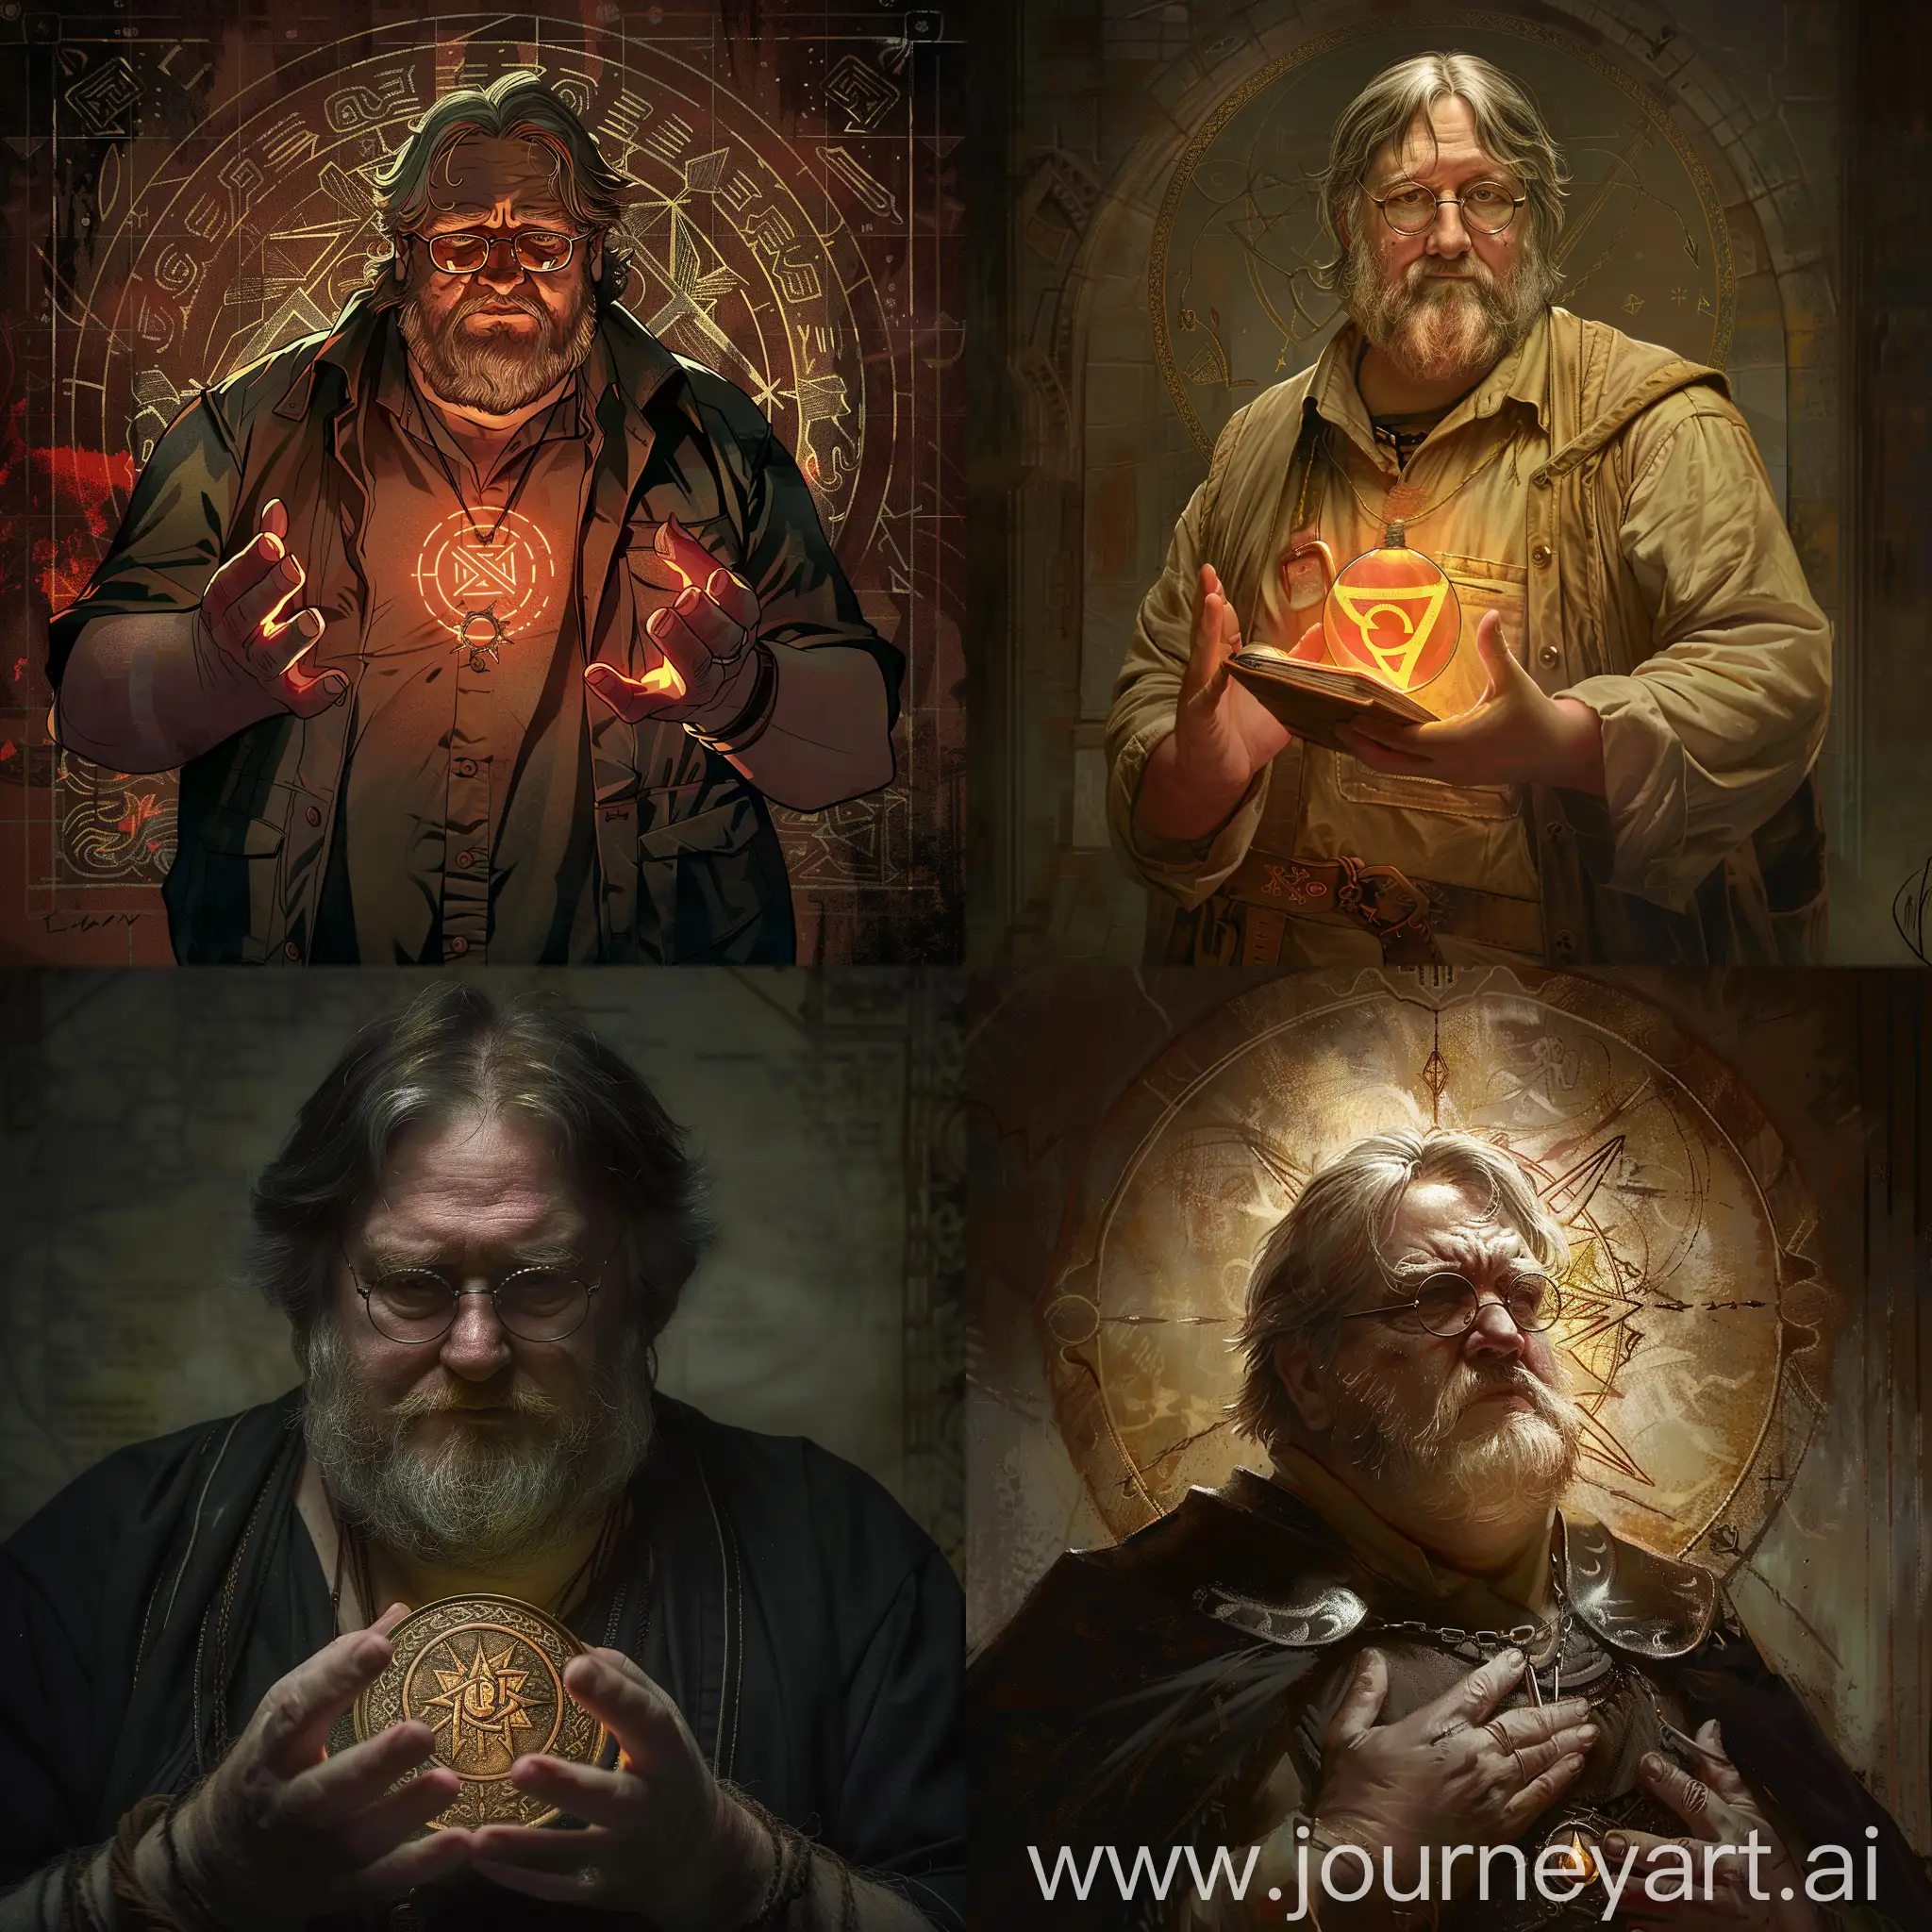 Gabe-Newell-Portrait-with-Personalized-Sigil-Artwork